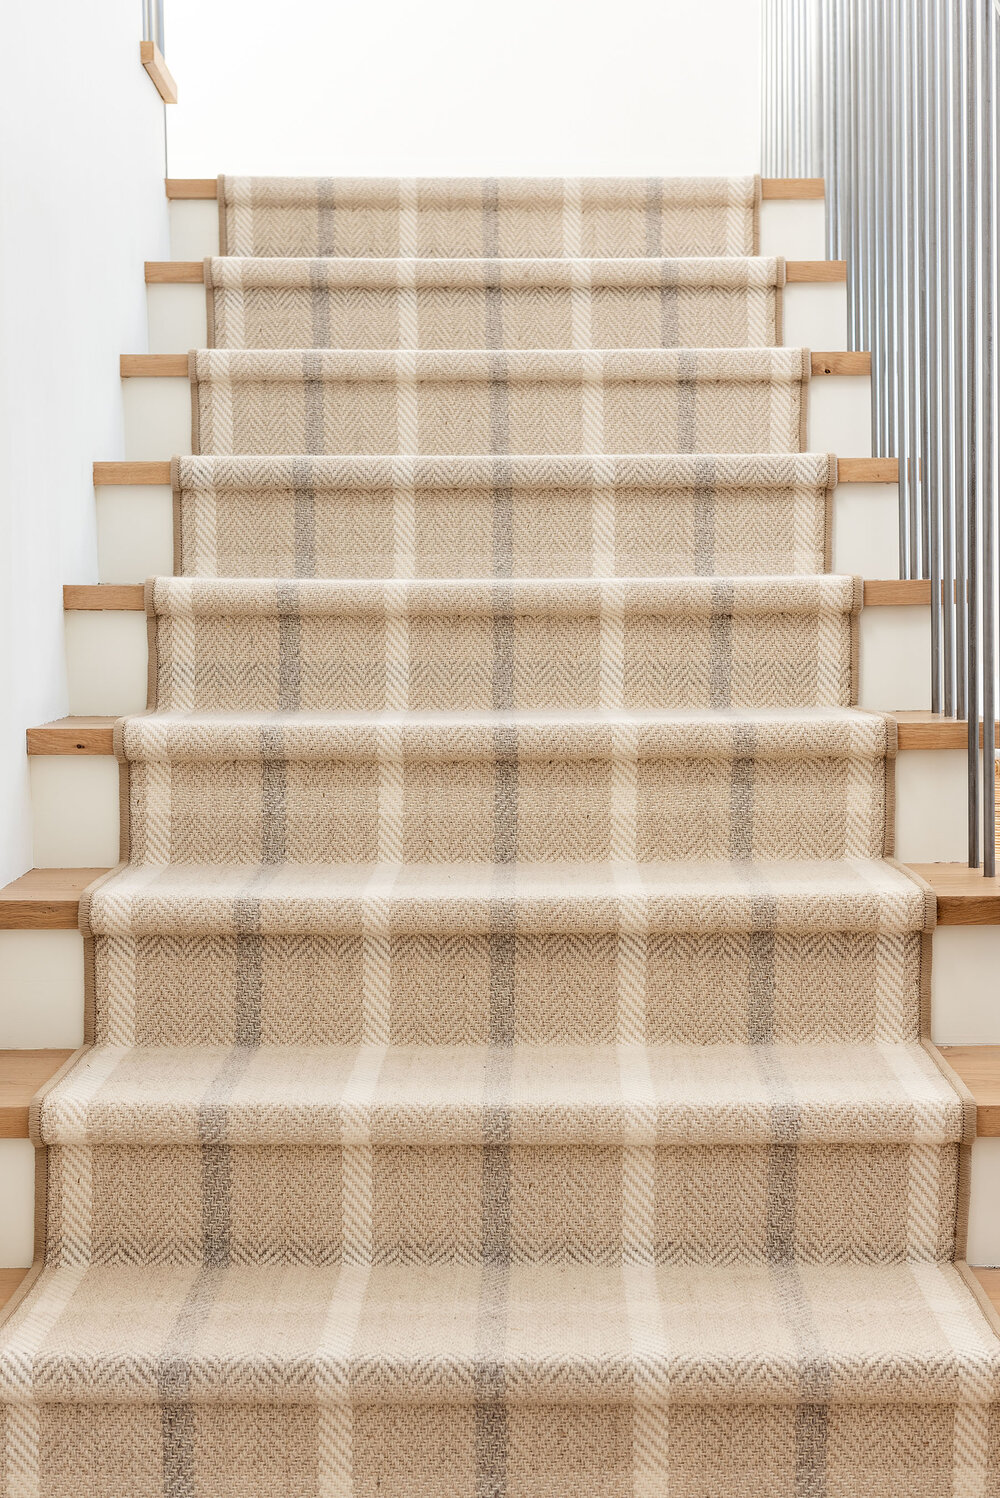 Tattersall Carpet from Stanton in The McGee Home.